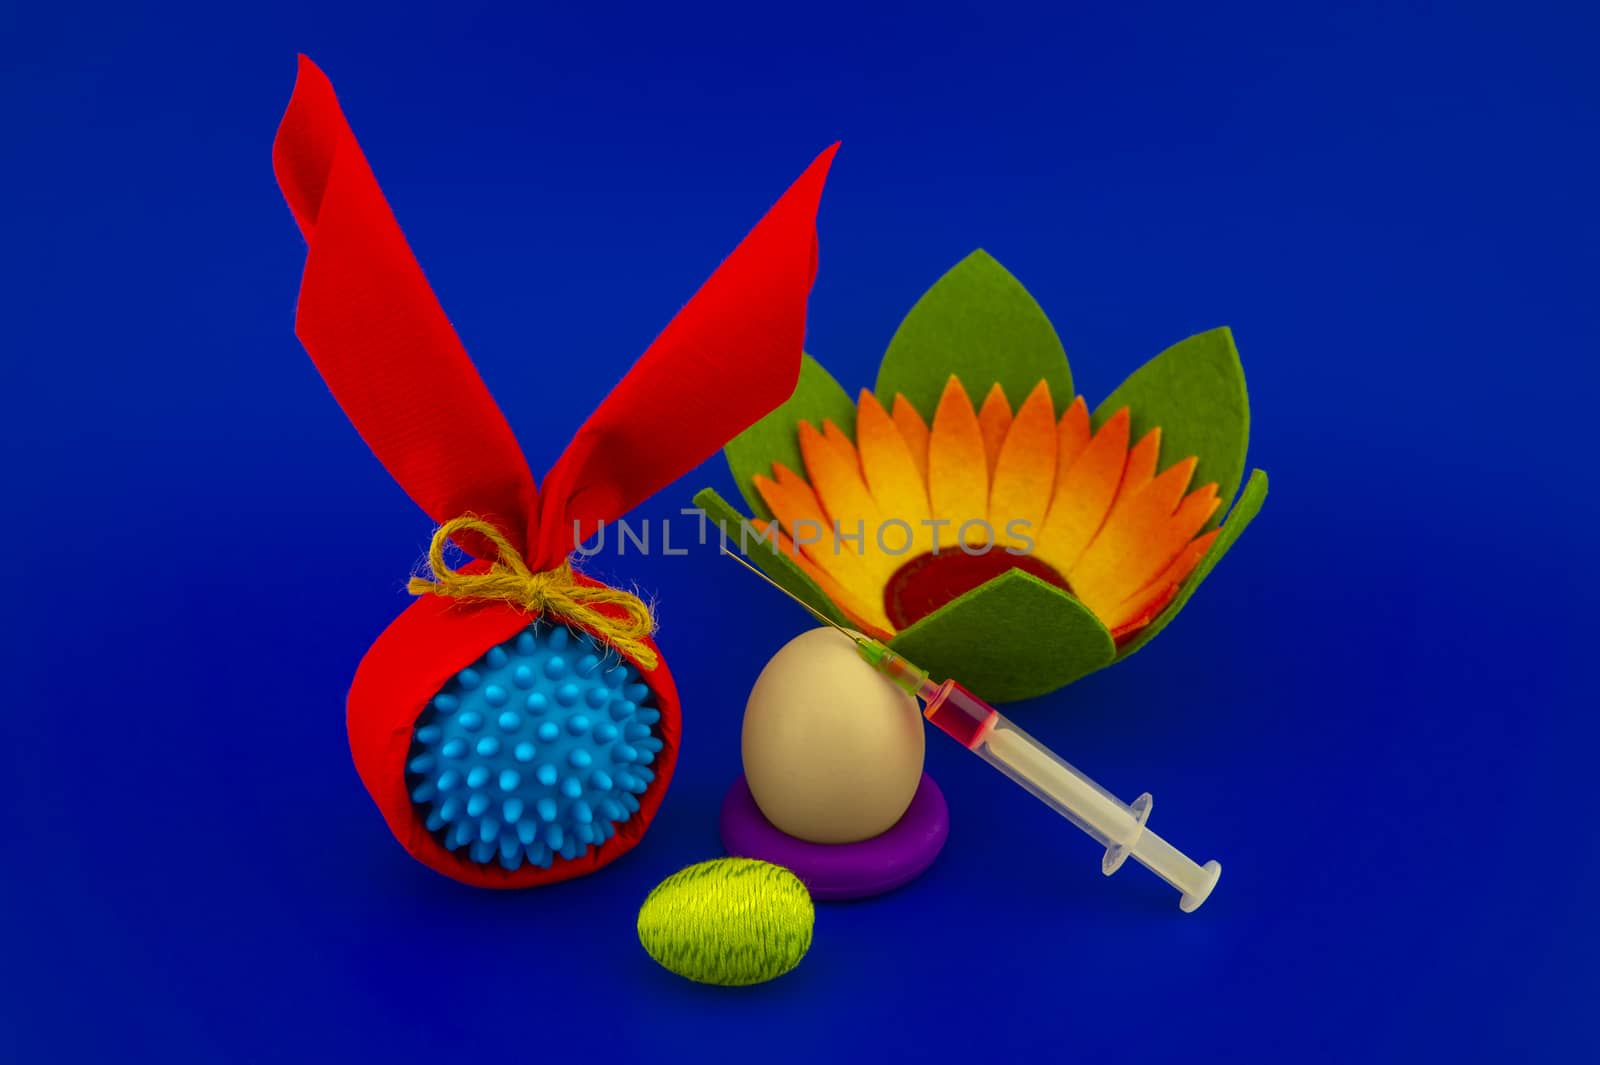 Easter arrangement with eggs and Covid-19 symbol by NetPix